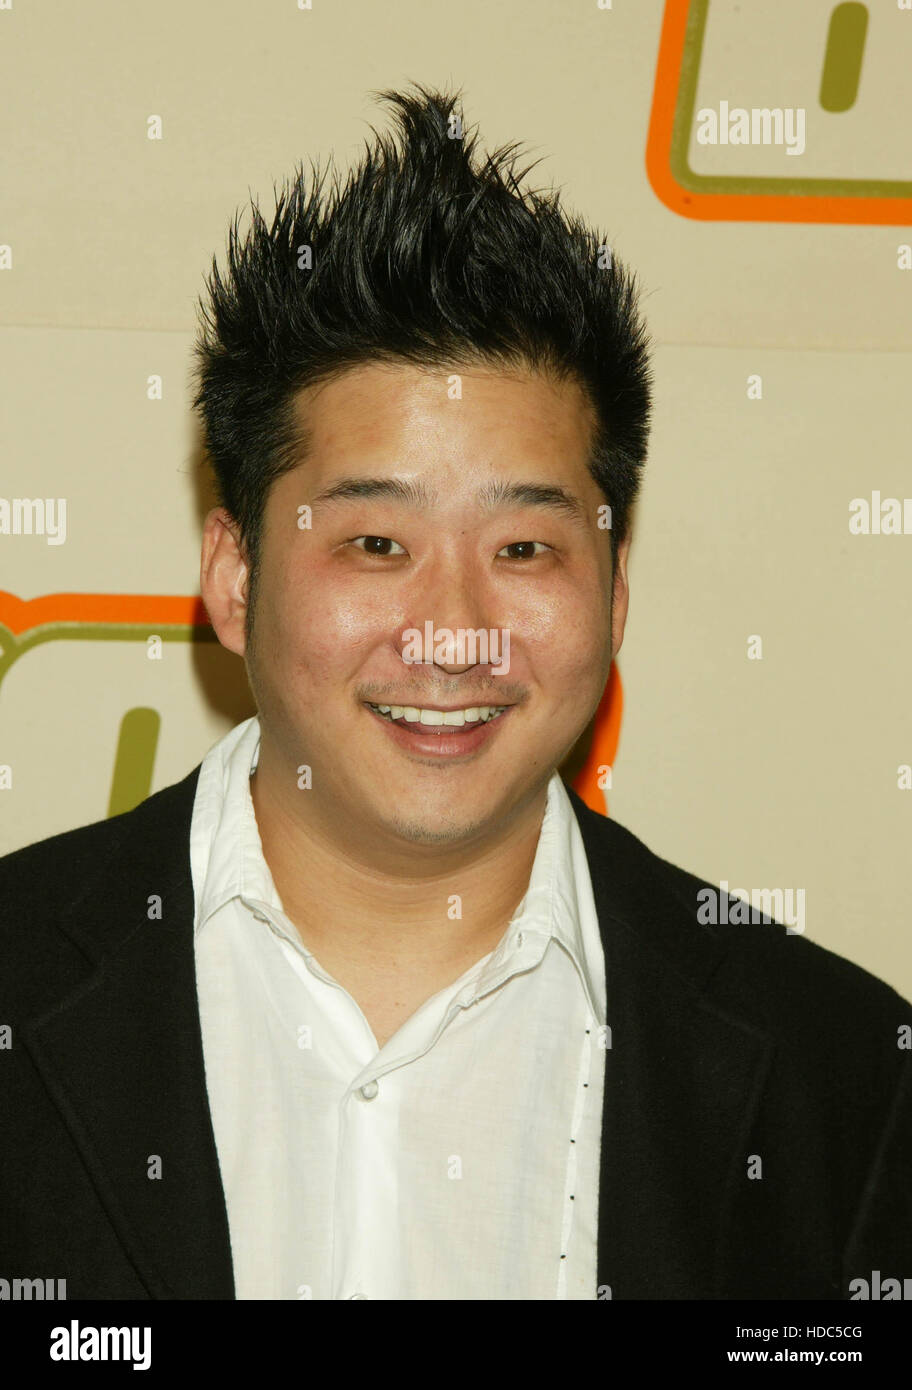 Bobby Lee at VH-1's Big in 2003 Awards Show at the Universal Ampitheater in  Los Angeles, Calif., Thursday, Nov. 20, 2003. Photo credit: Francis Specker  Stock Photo - Alamy